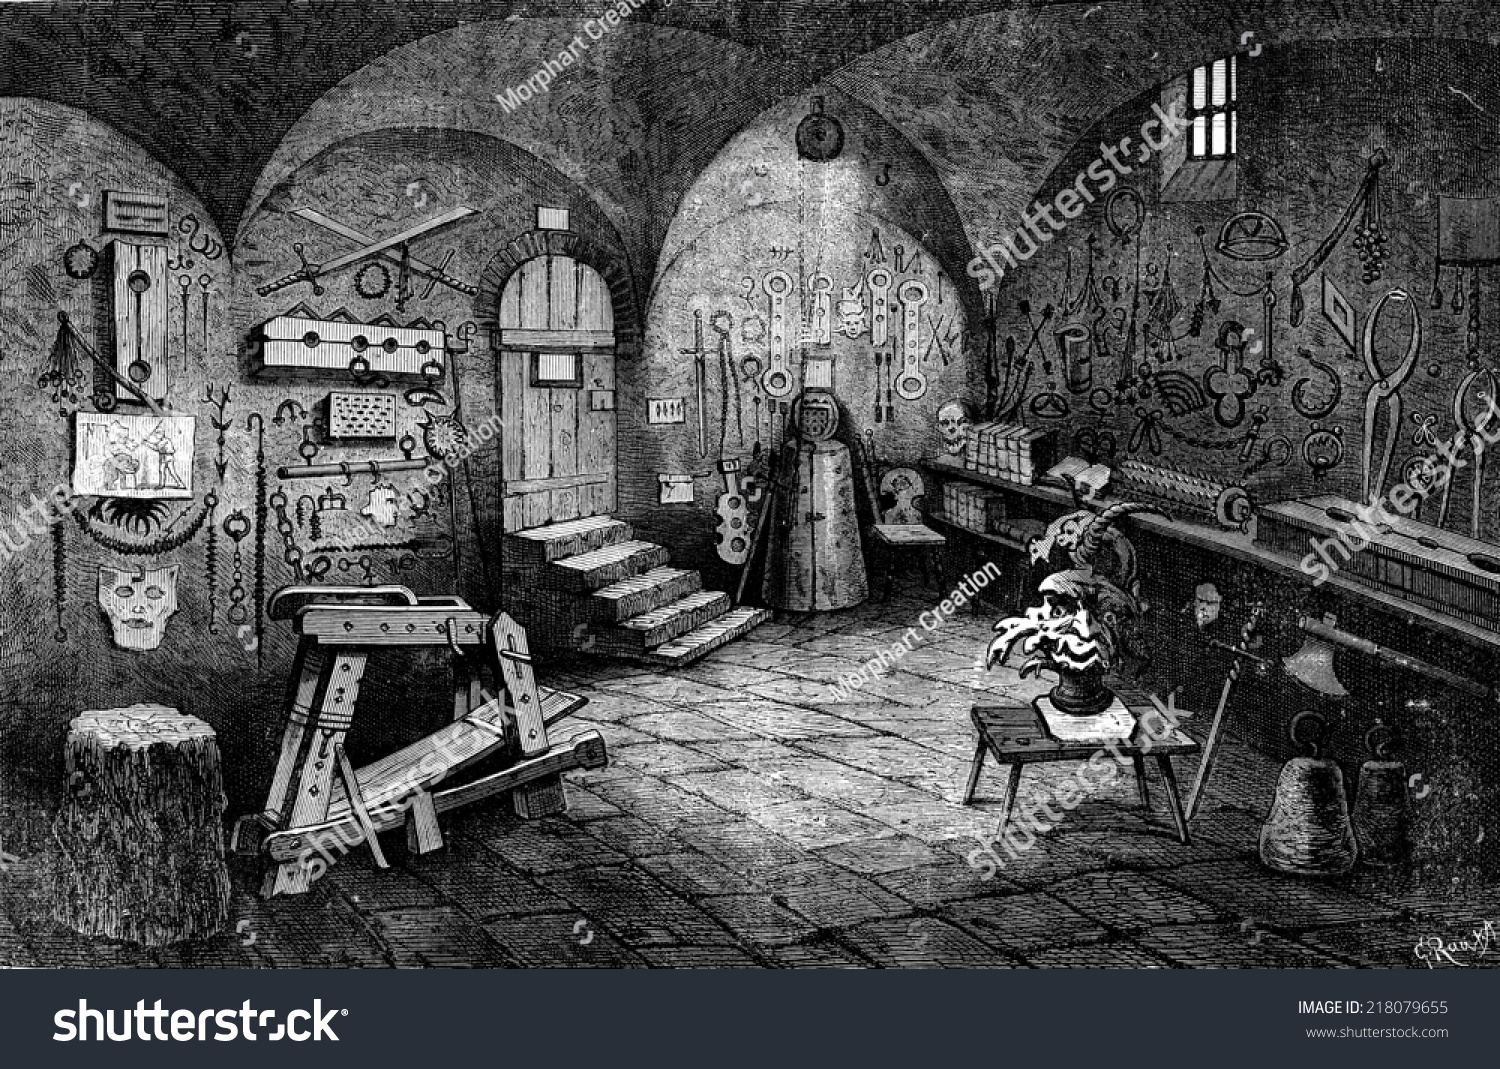 torture chamber clipart - photo #22